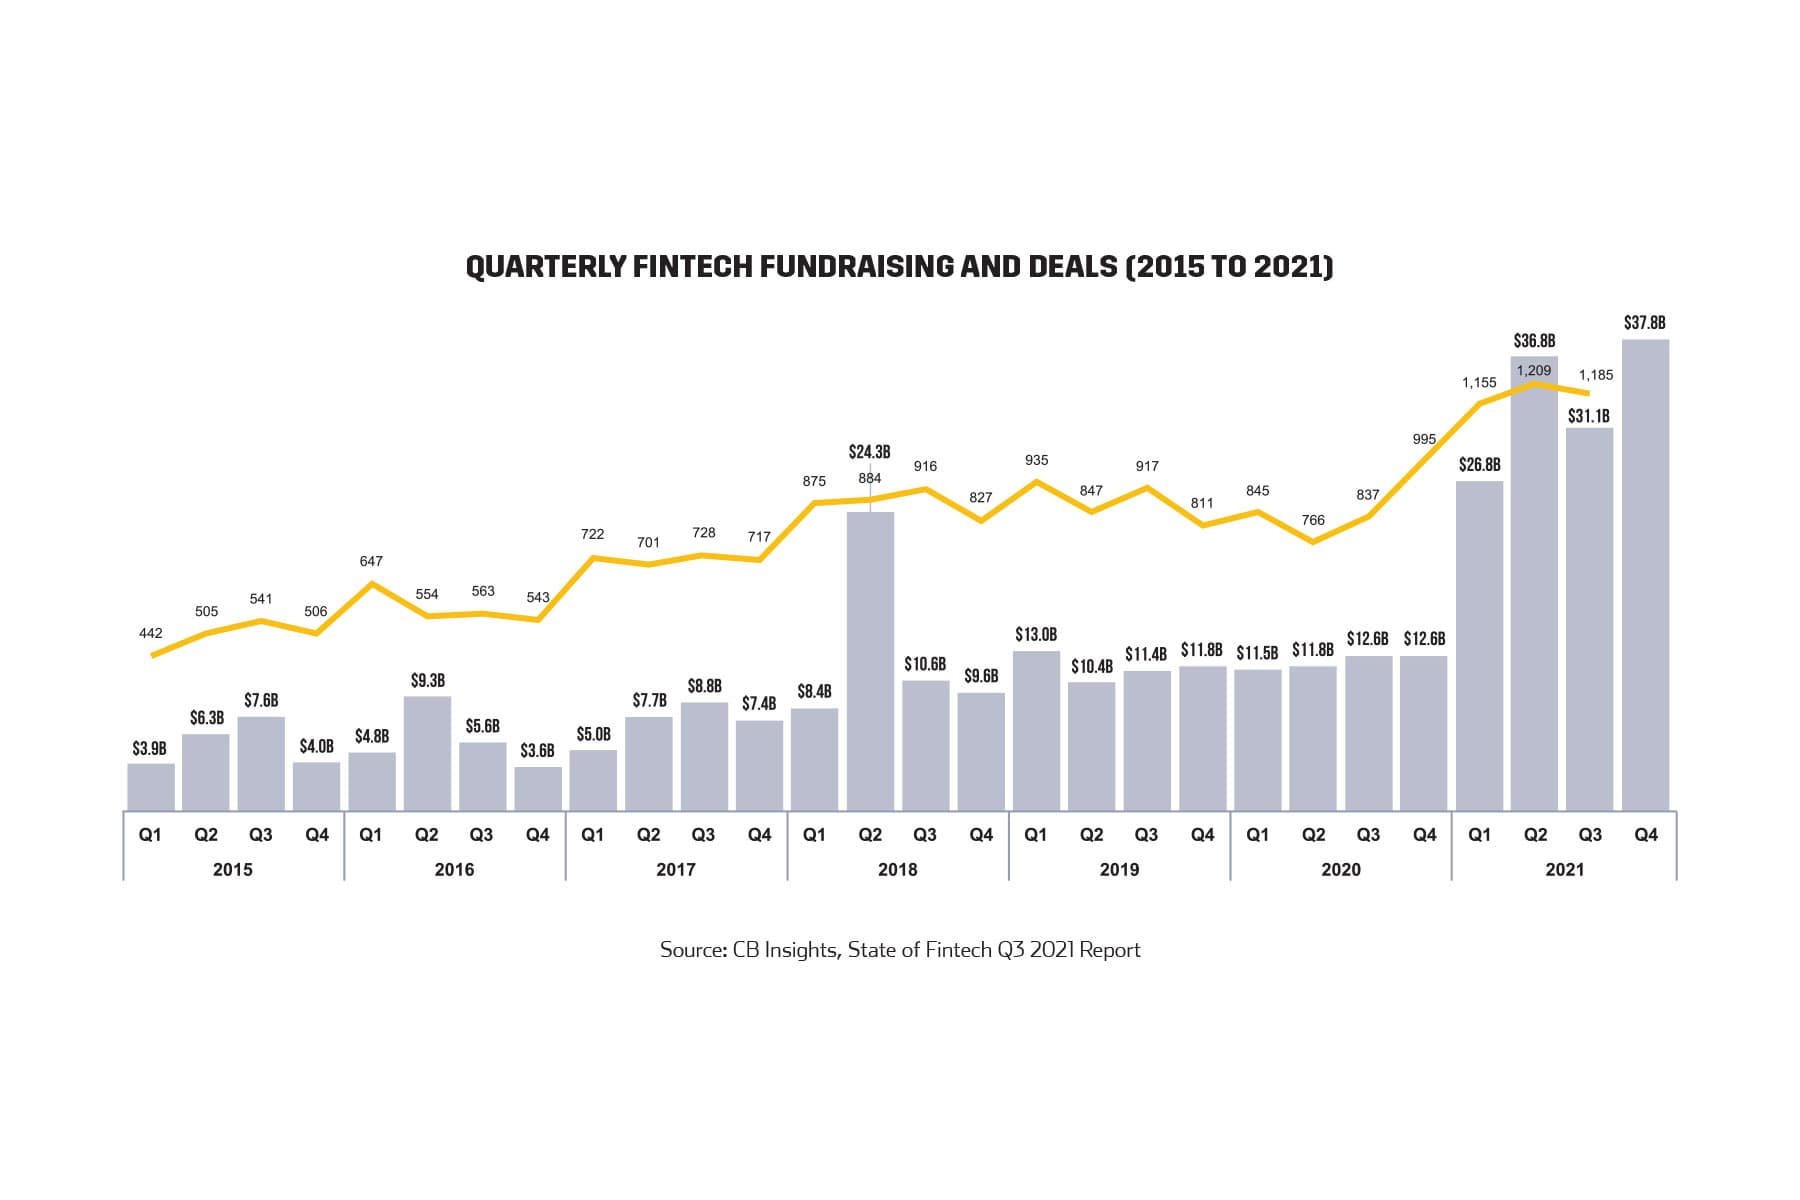 Quarterly Fintech Fundraising and Deals (2015 to 2021)